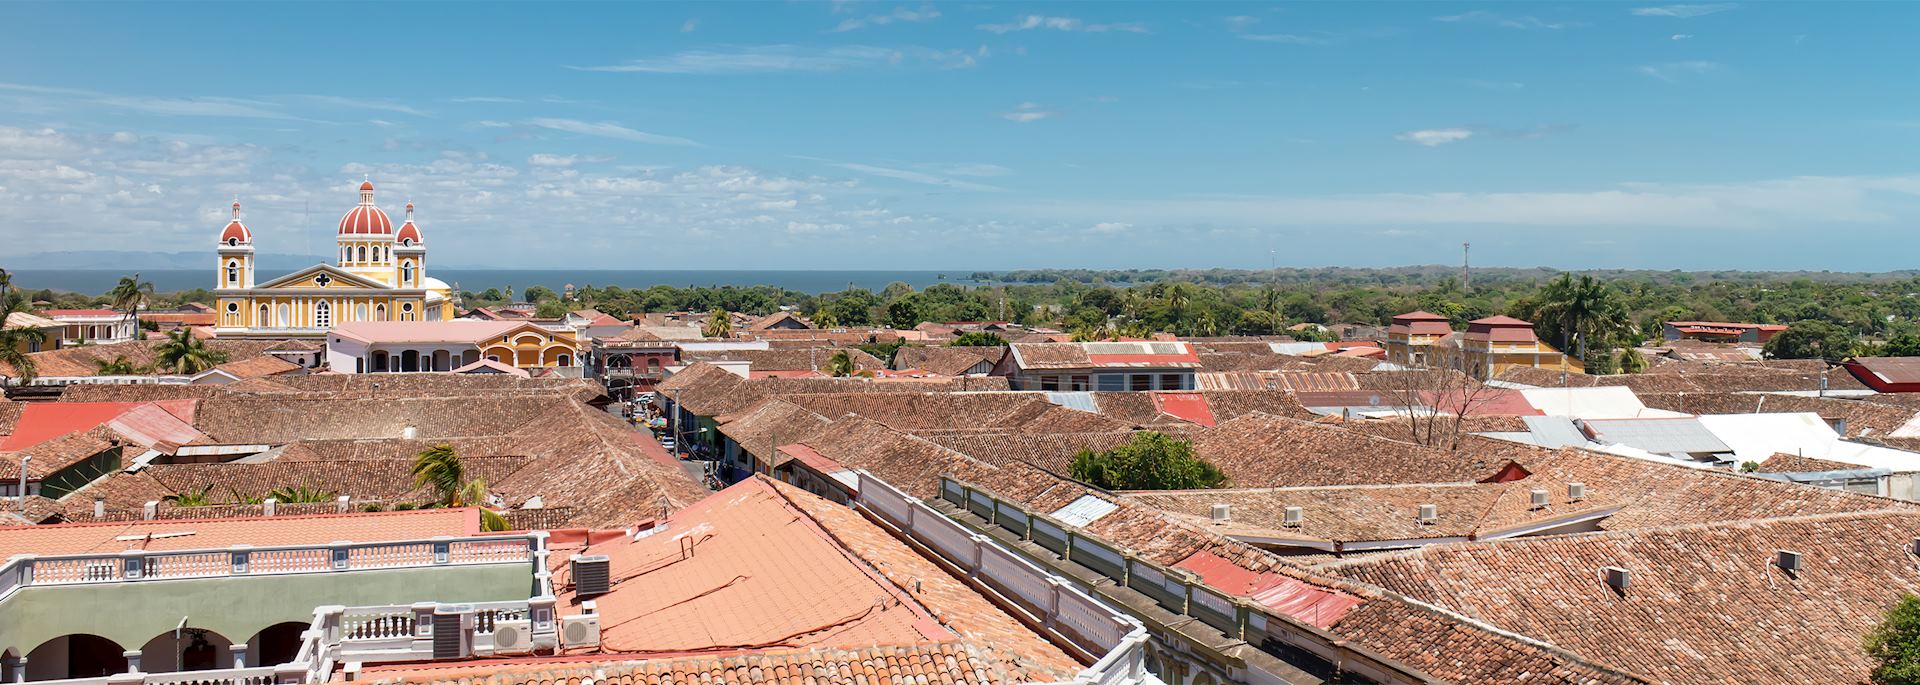 Granada Cathedral and rooftops, Nicaragua